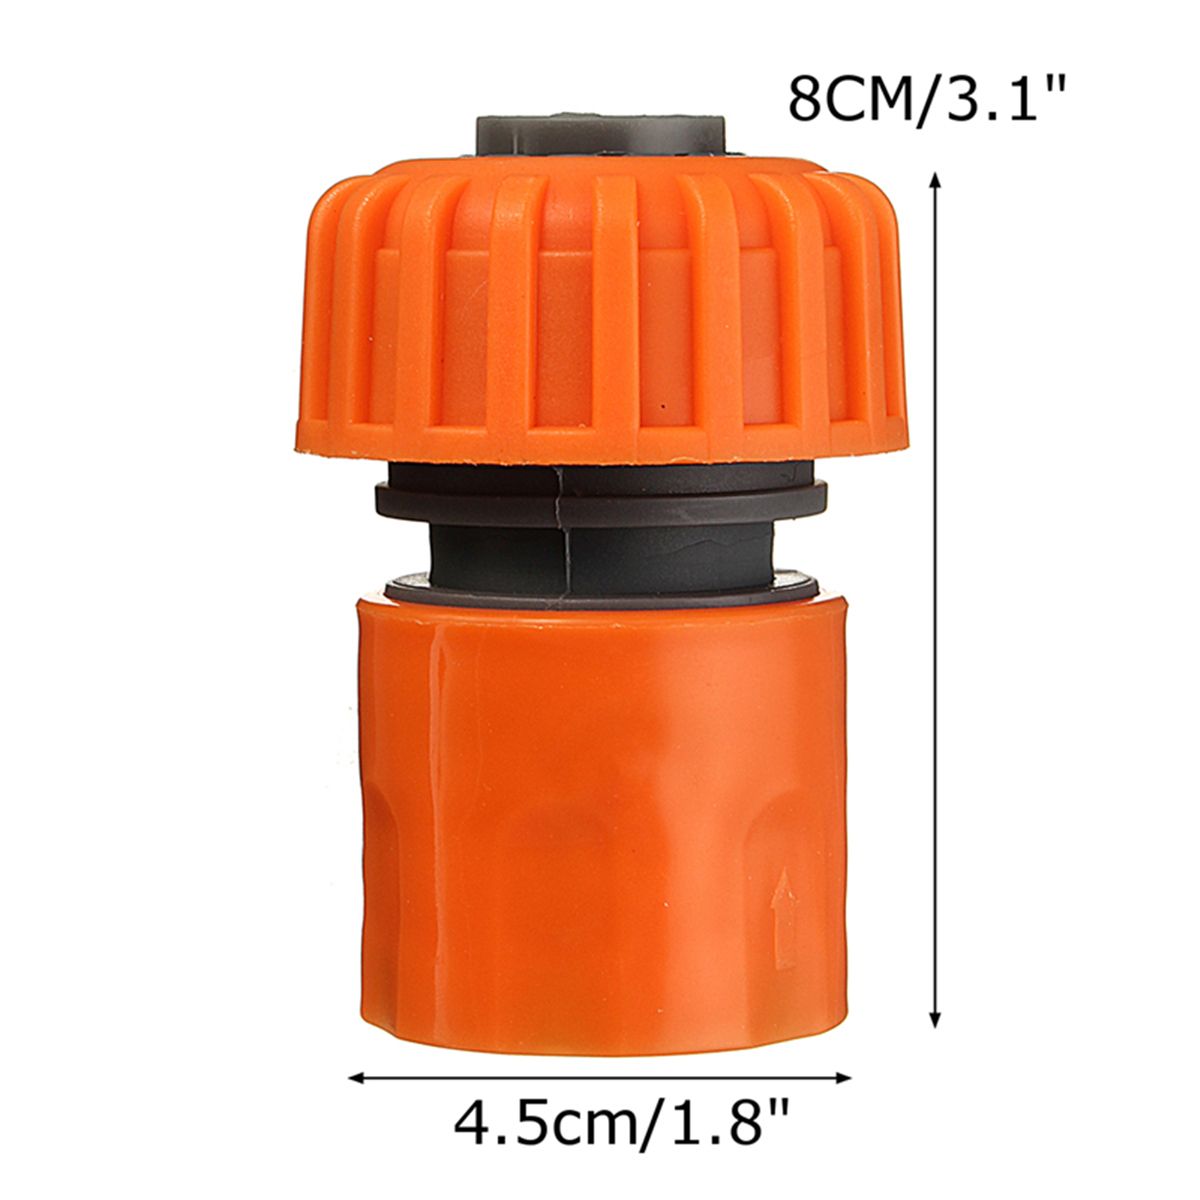 10Pcs-Orange-34quot-Garden-Joiner-Quick-Connect-Adapter-Water-Hose-Pipe-Washing-1329161